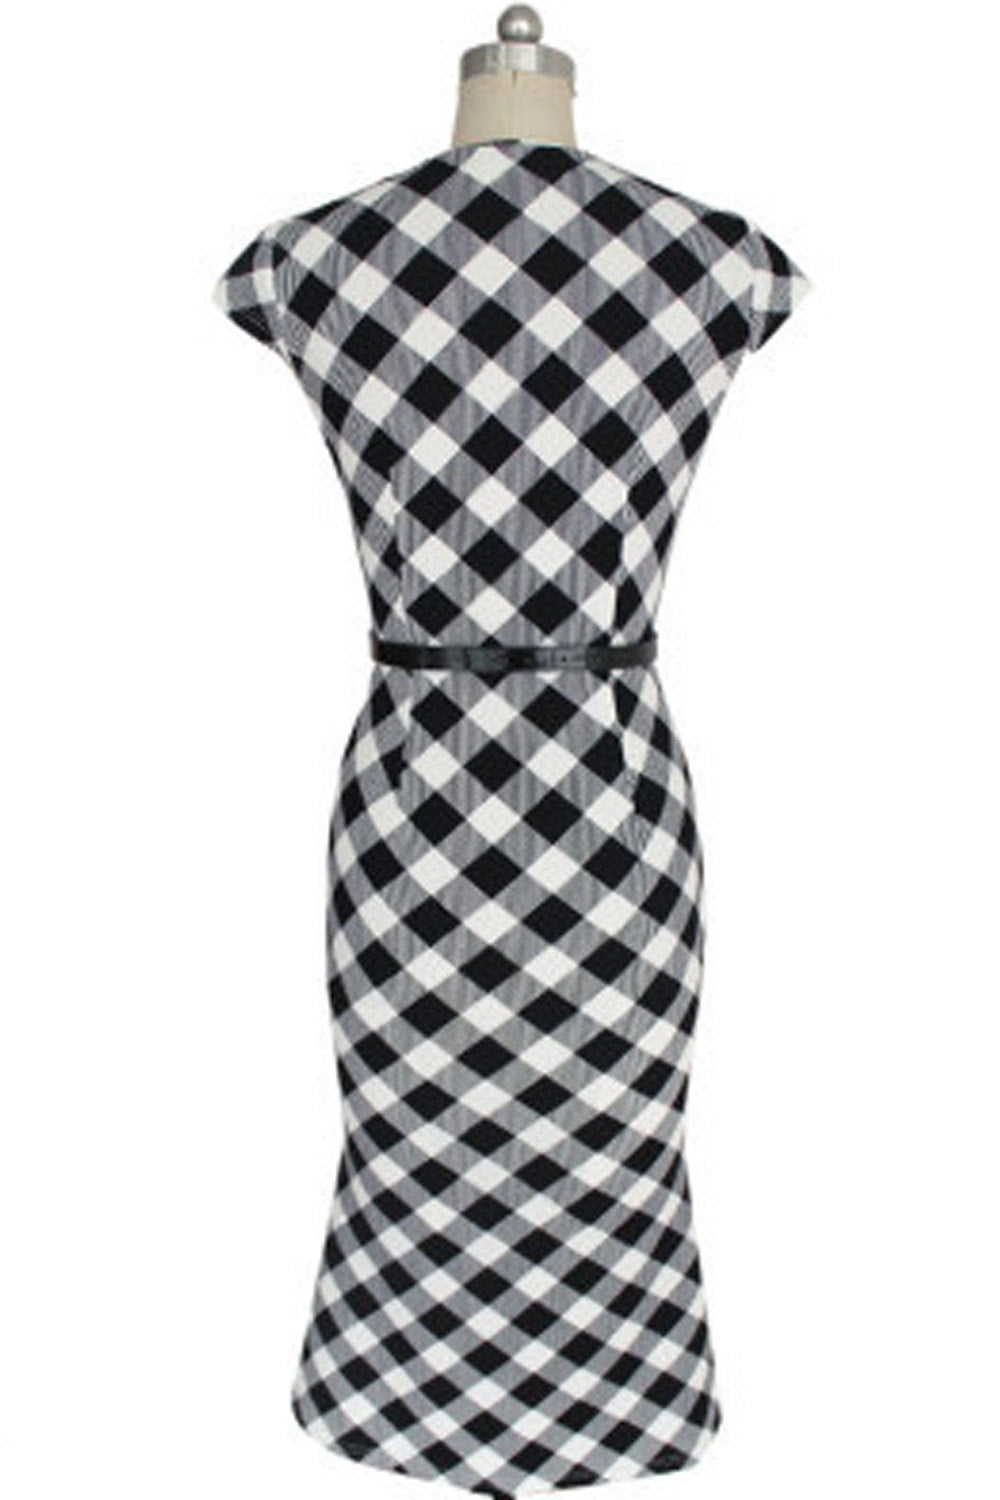 Ketty More Women Slim V-Neck Collar Neck Plaid Dress Decorated With Buttons Black-KMWD309